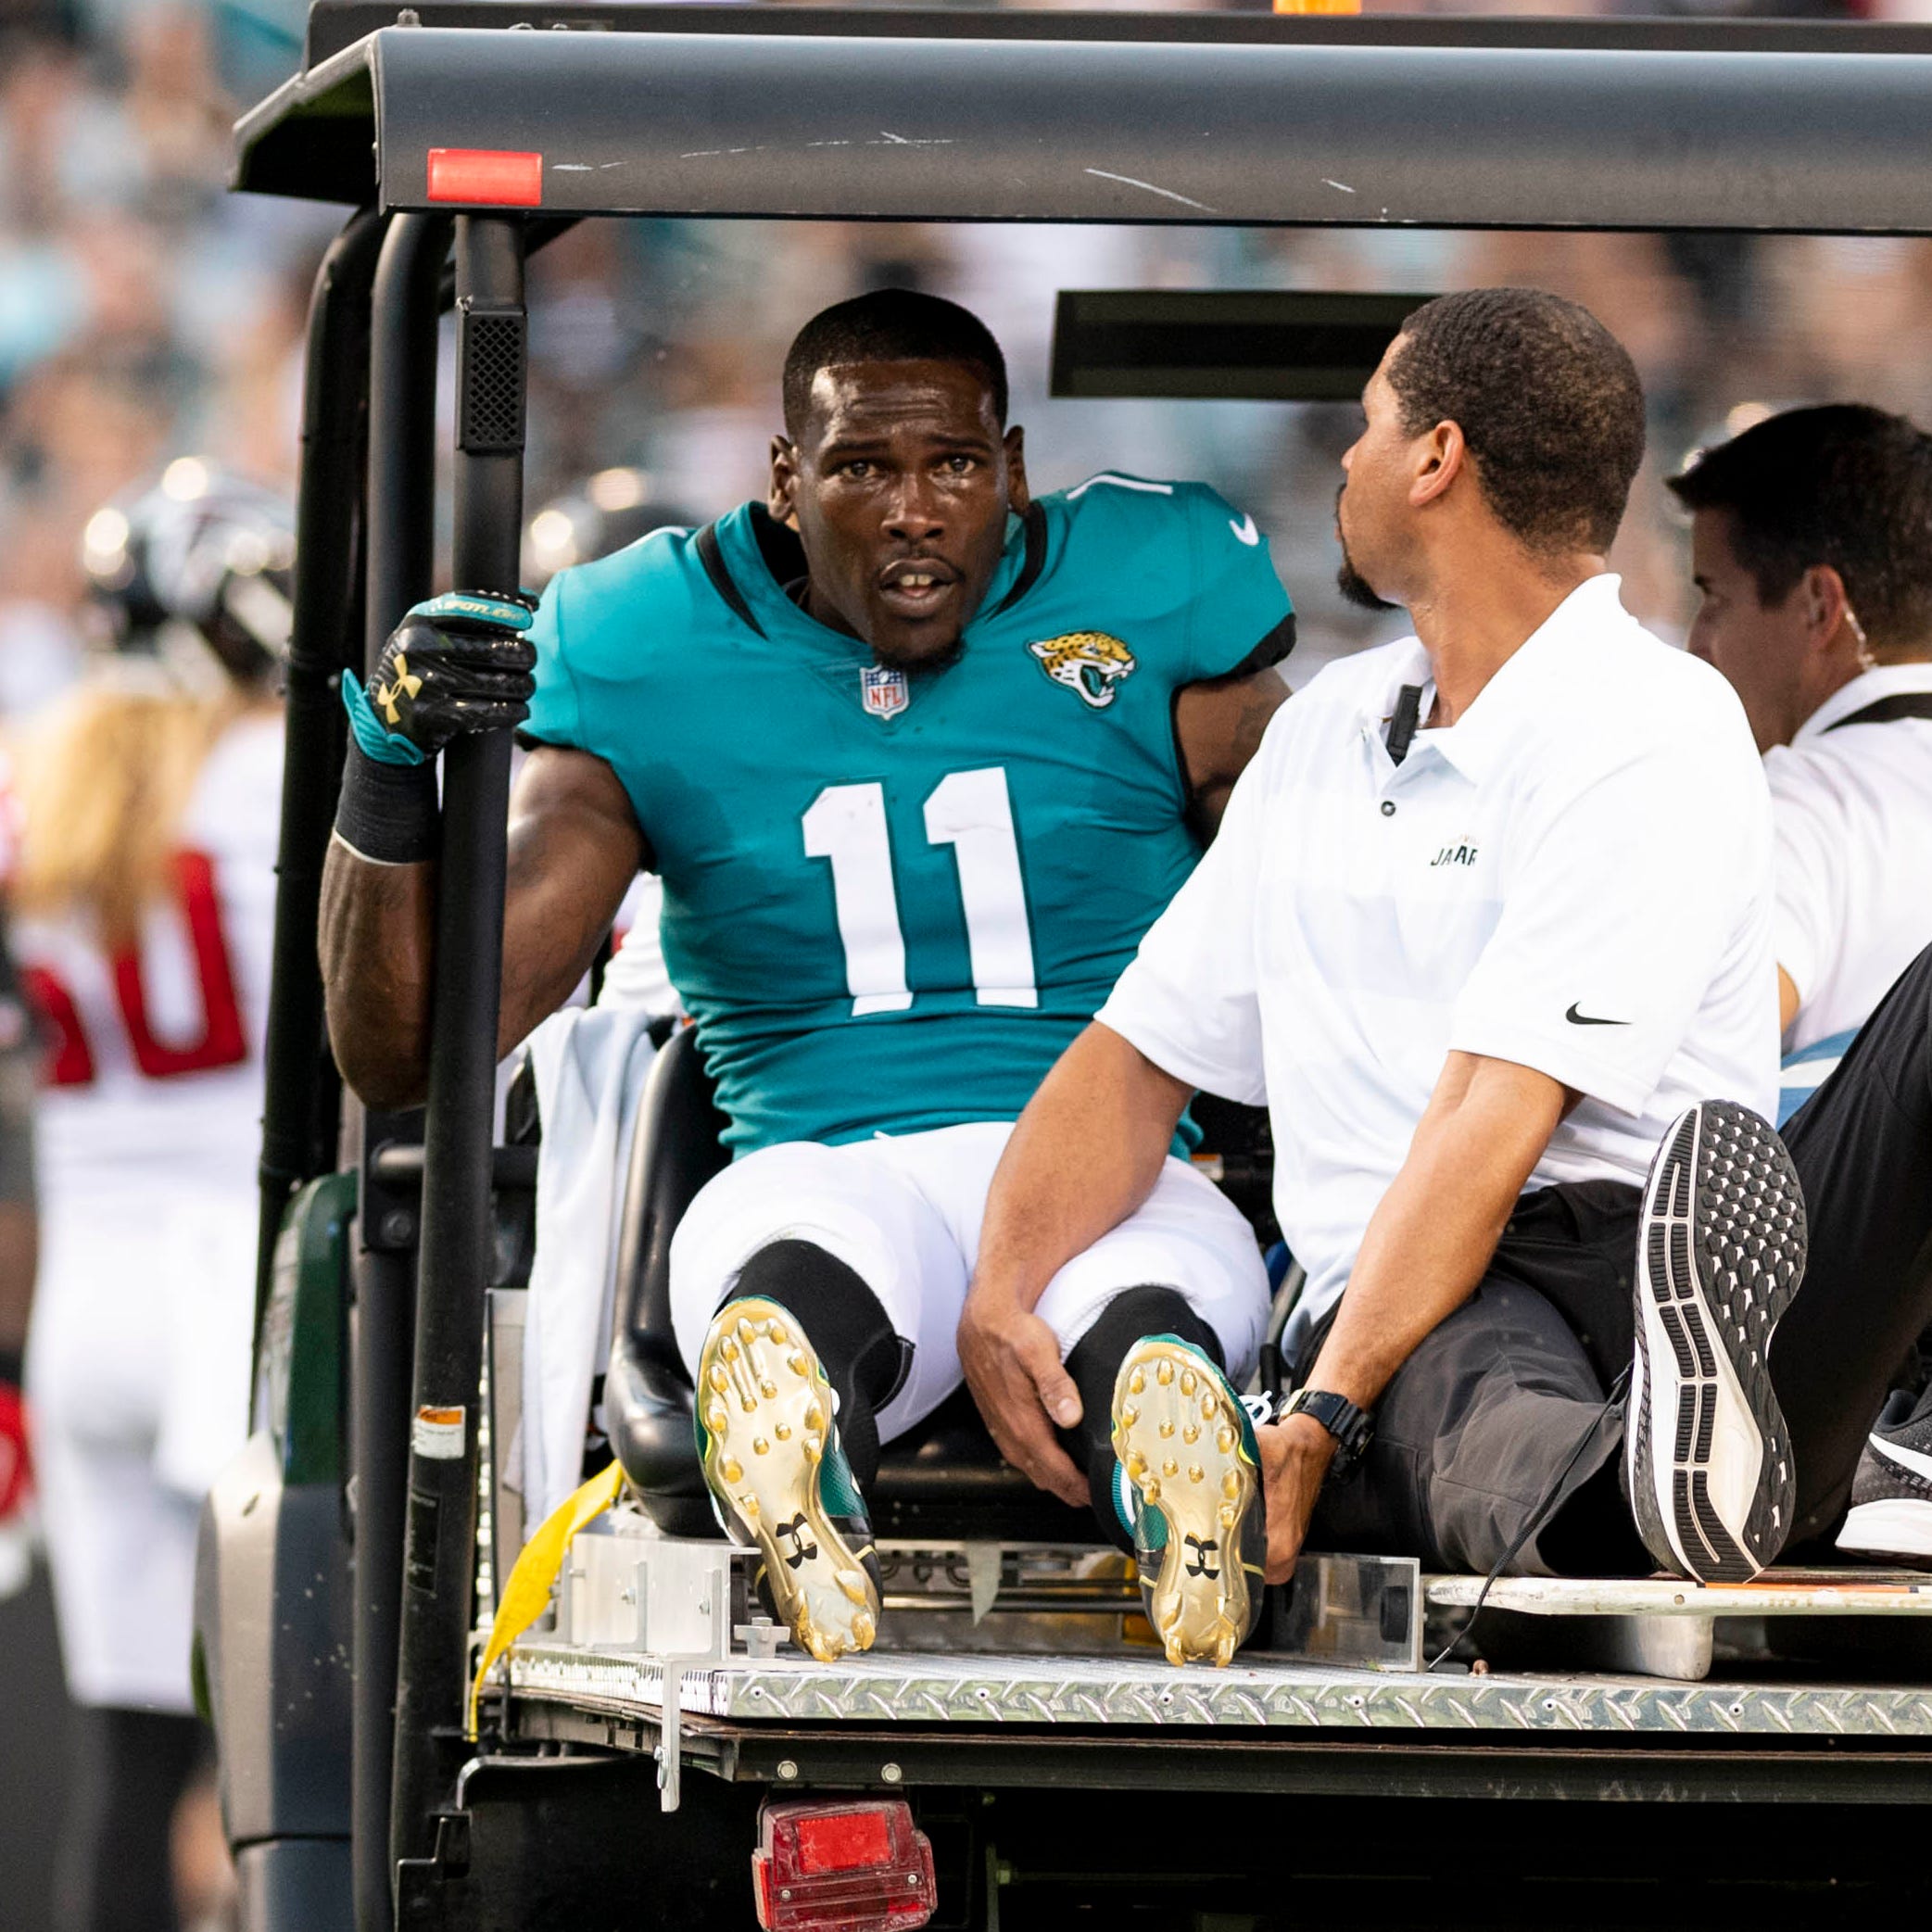 Jaguars WR Marqise Lee is carted off the field Saturday night.